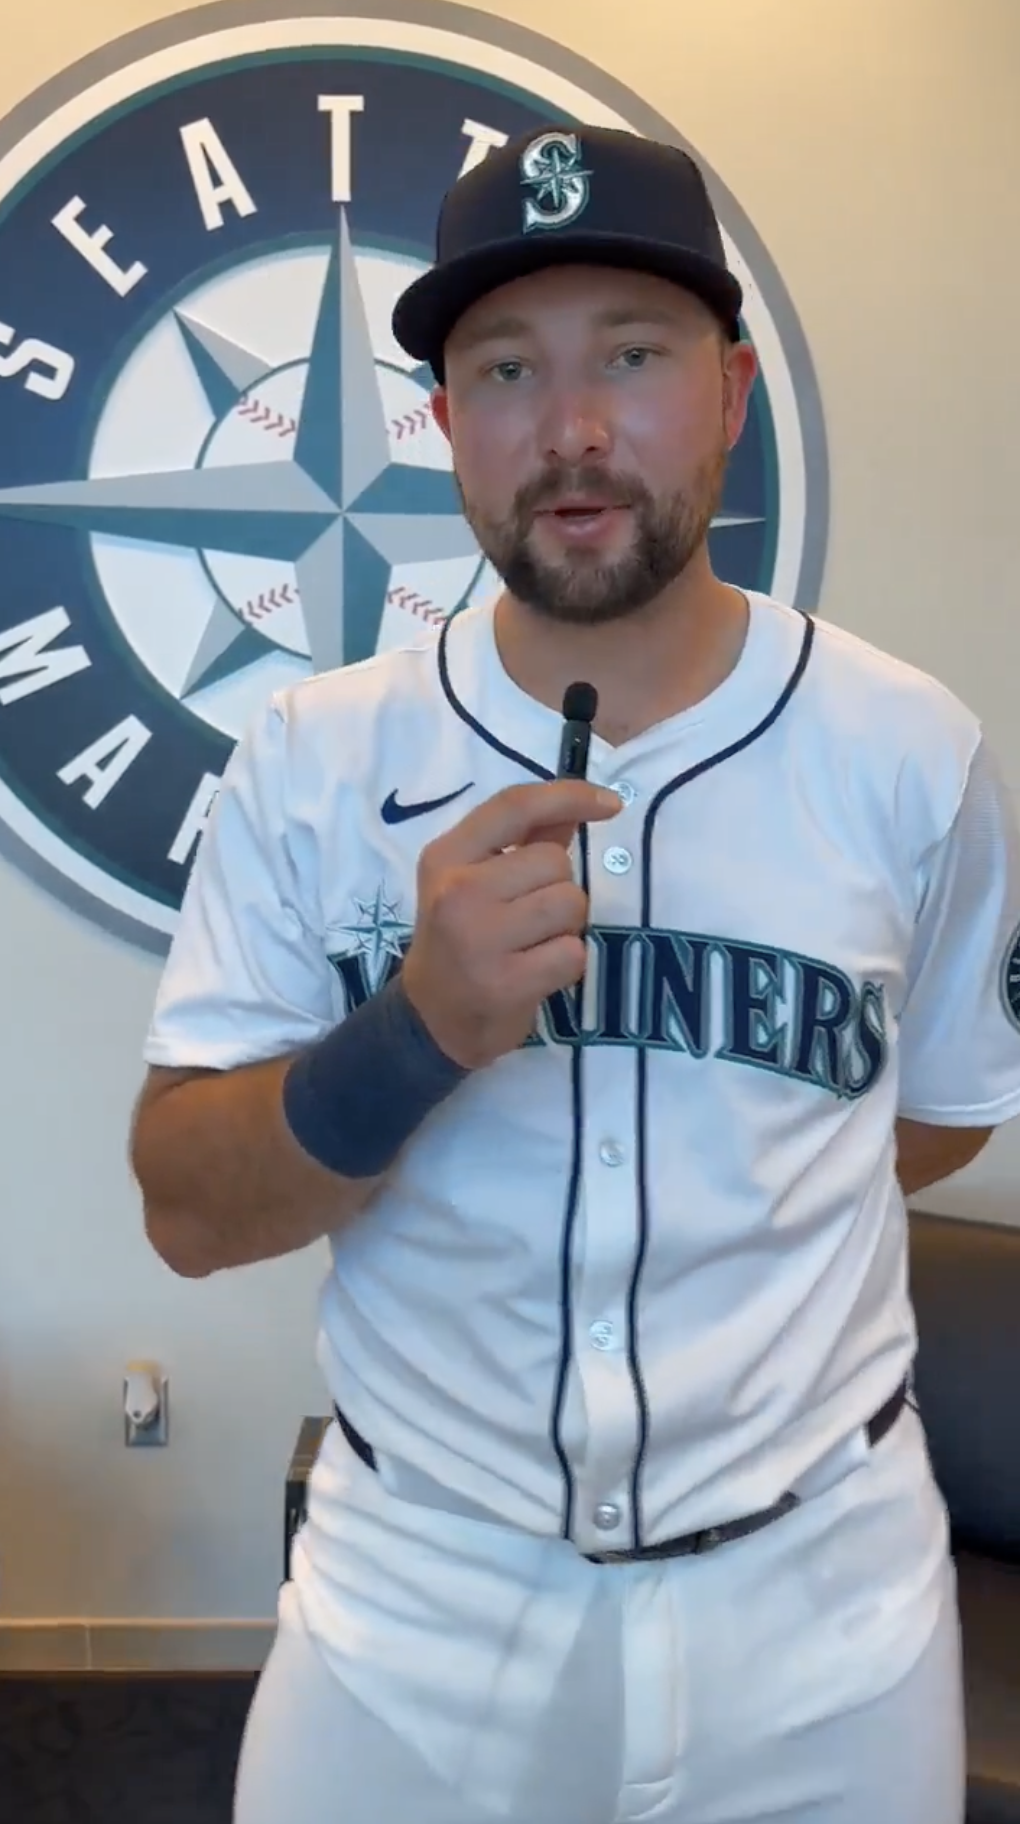 Man in Seattle Mariners baseball uniform speaking into a microphone